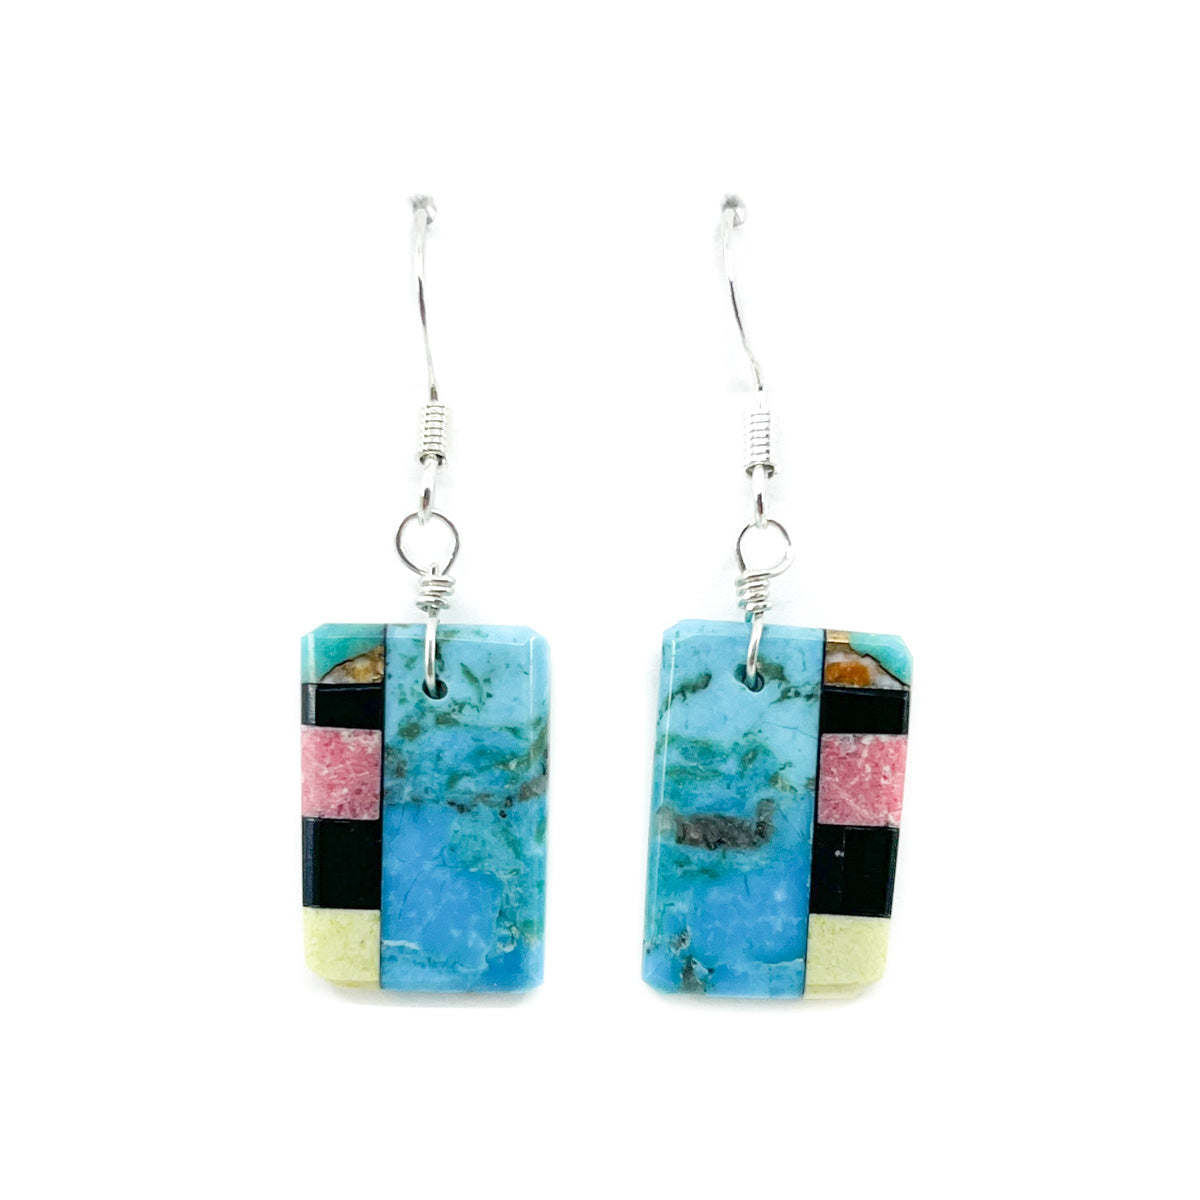 Turquoise Mosaic Earrings with Lavender/Pink Stones